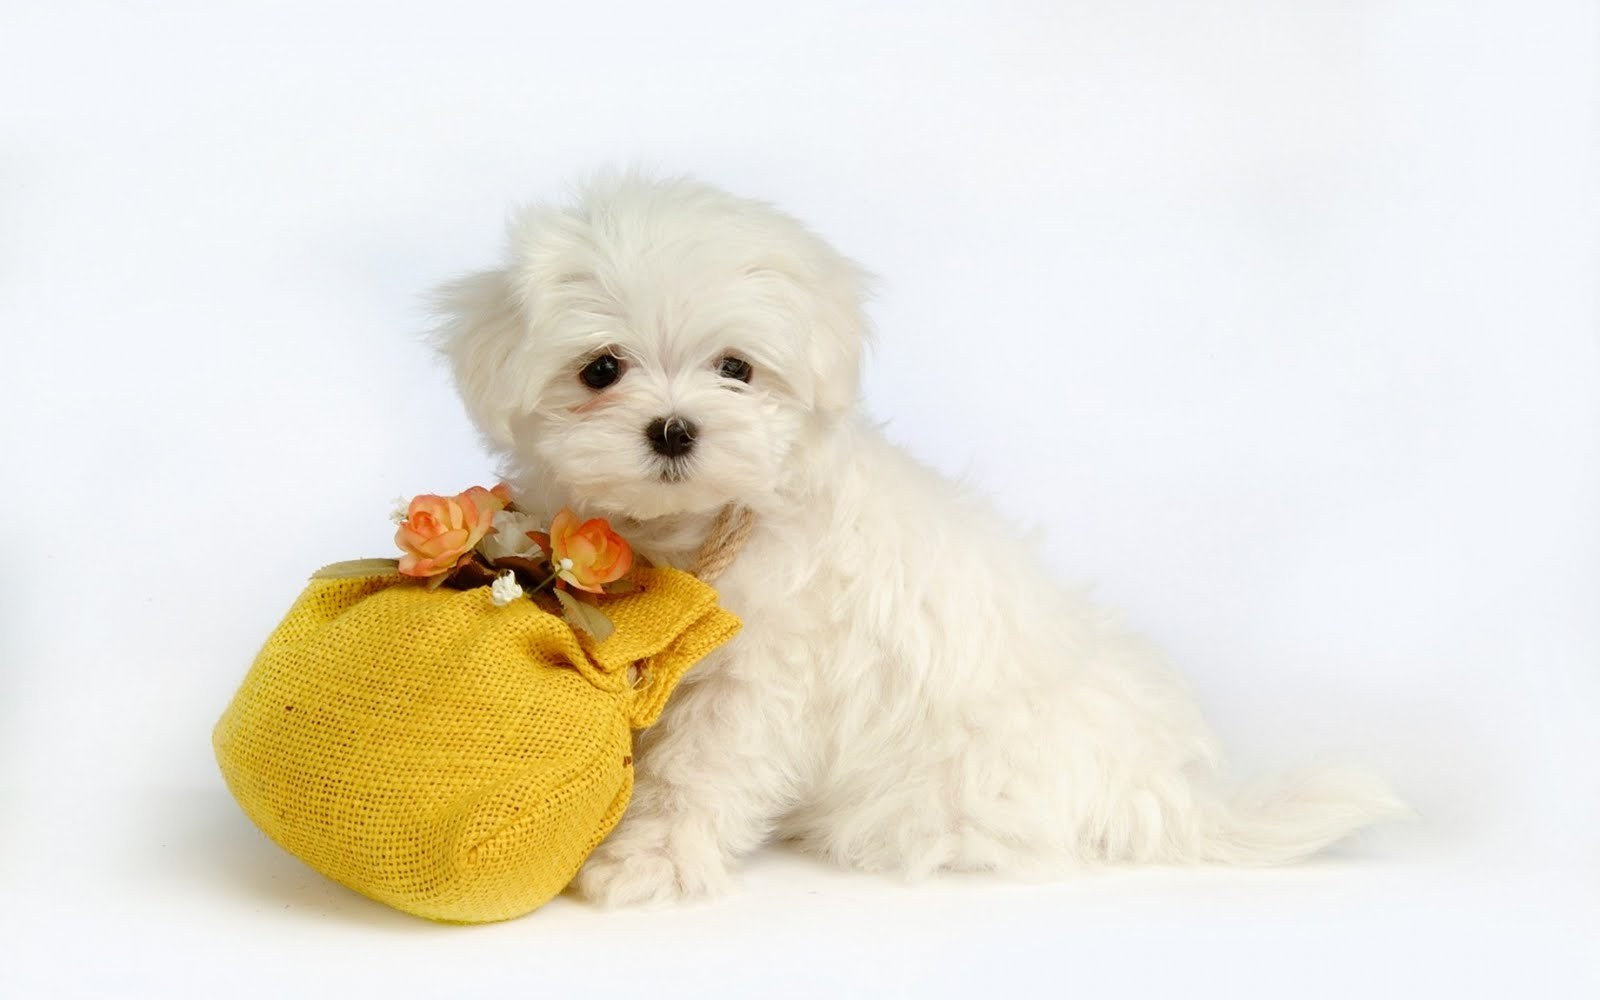 Puppies images Cute Puppy wallpaper photos 15813371